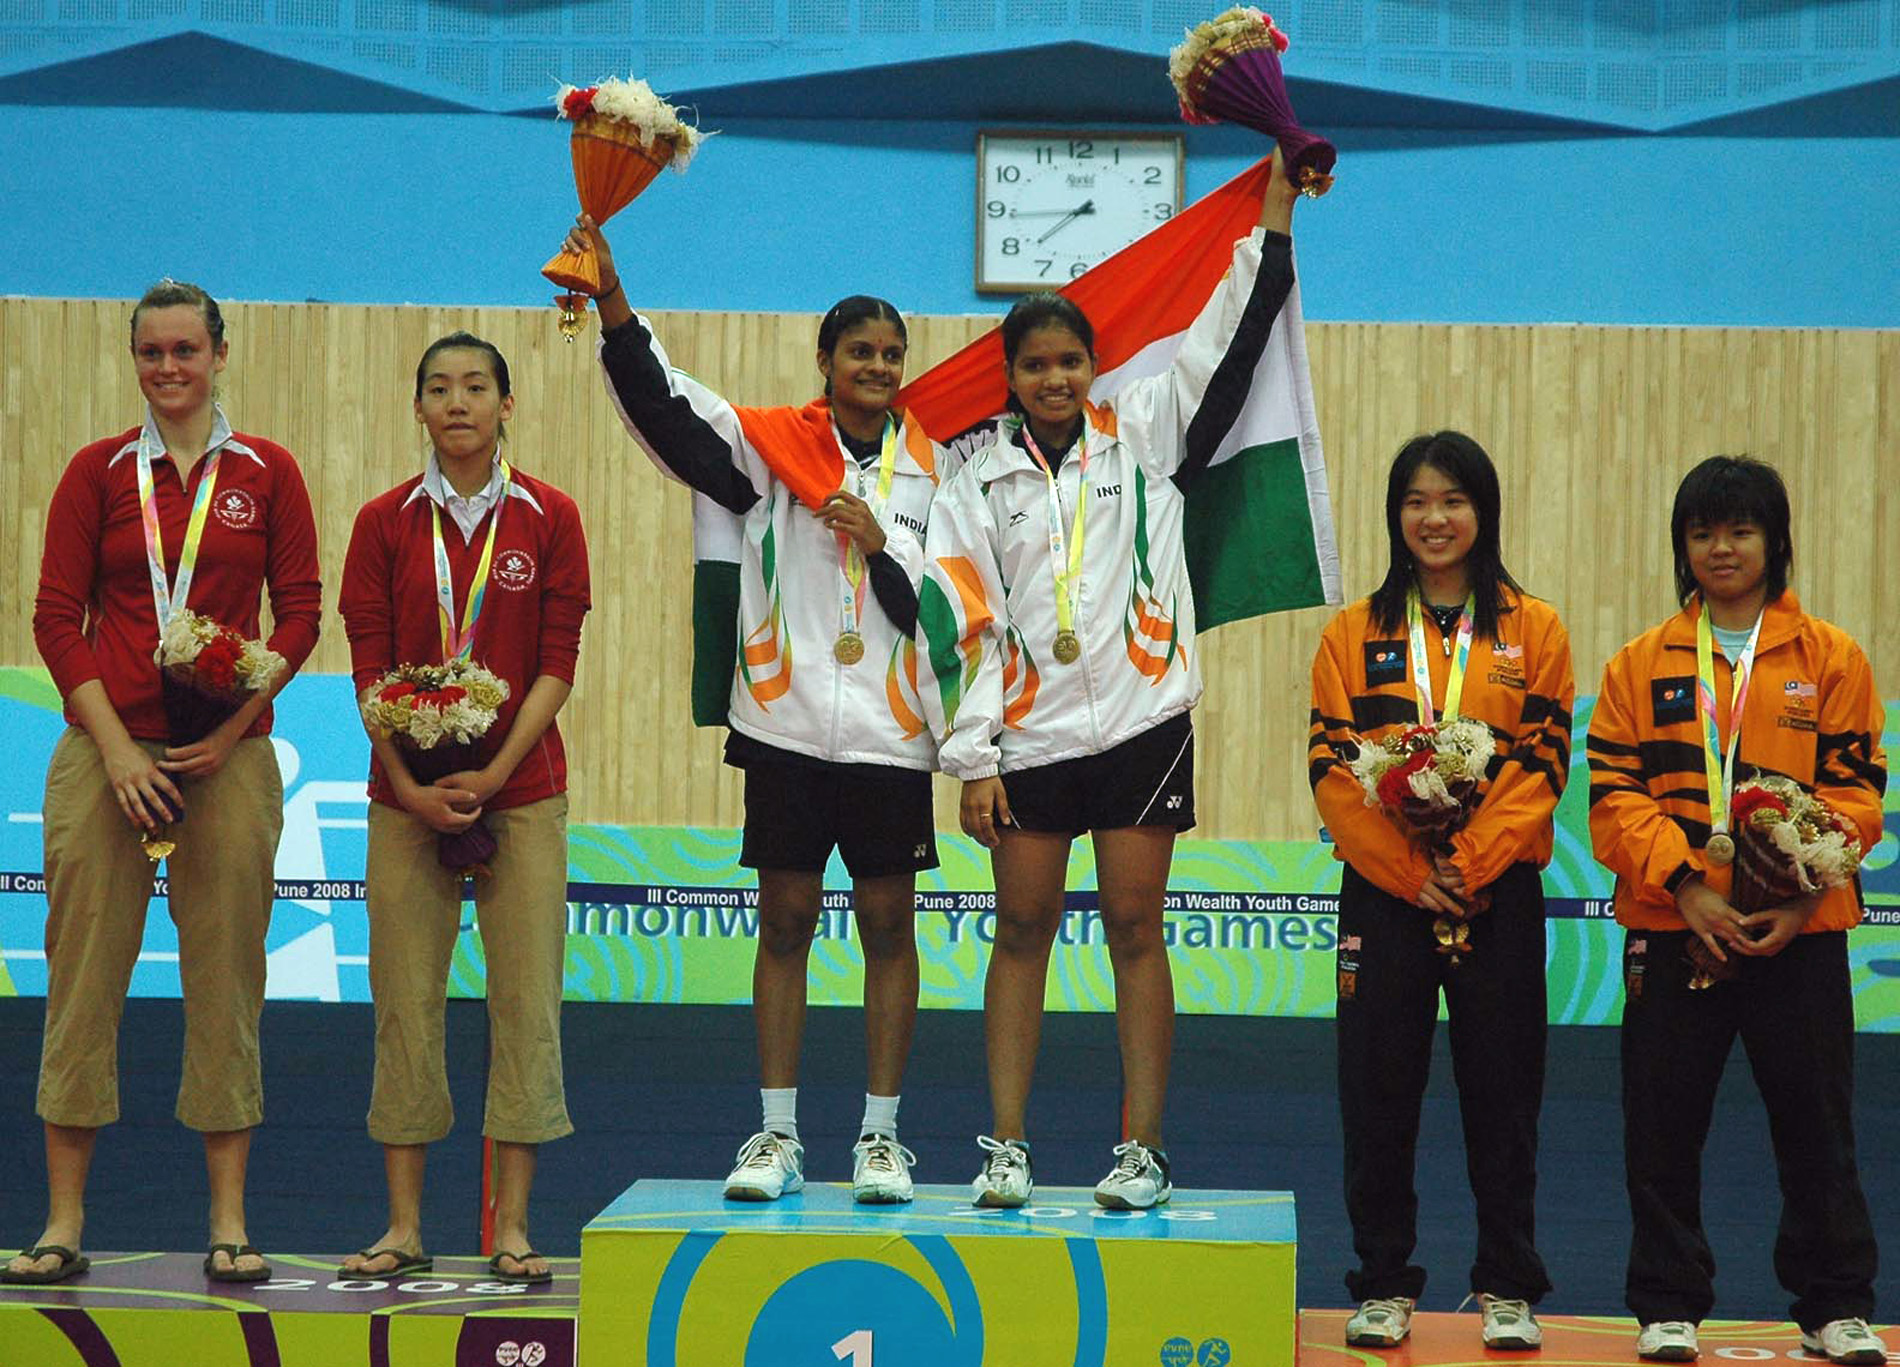 P.C Thulasi and Reddy Sikki from India won the gold medal, Bruce Mary Alexandra, Li Man Shan Michelle from Canada won the Silver and Lim Ee Von NG Hui Em from Malaysia won the bronze medal in Women’s Doubles badminton event at the 3rd Commonwealth Youth Games-2008, in Pune on October 17, 2008.